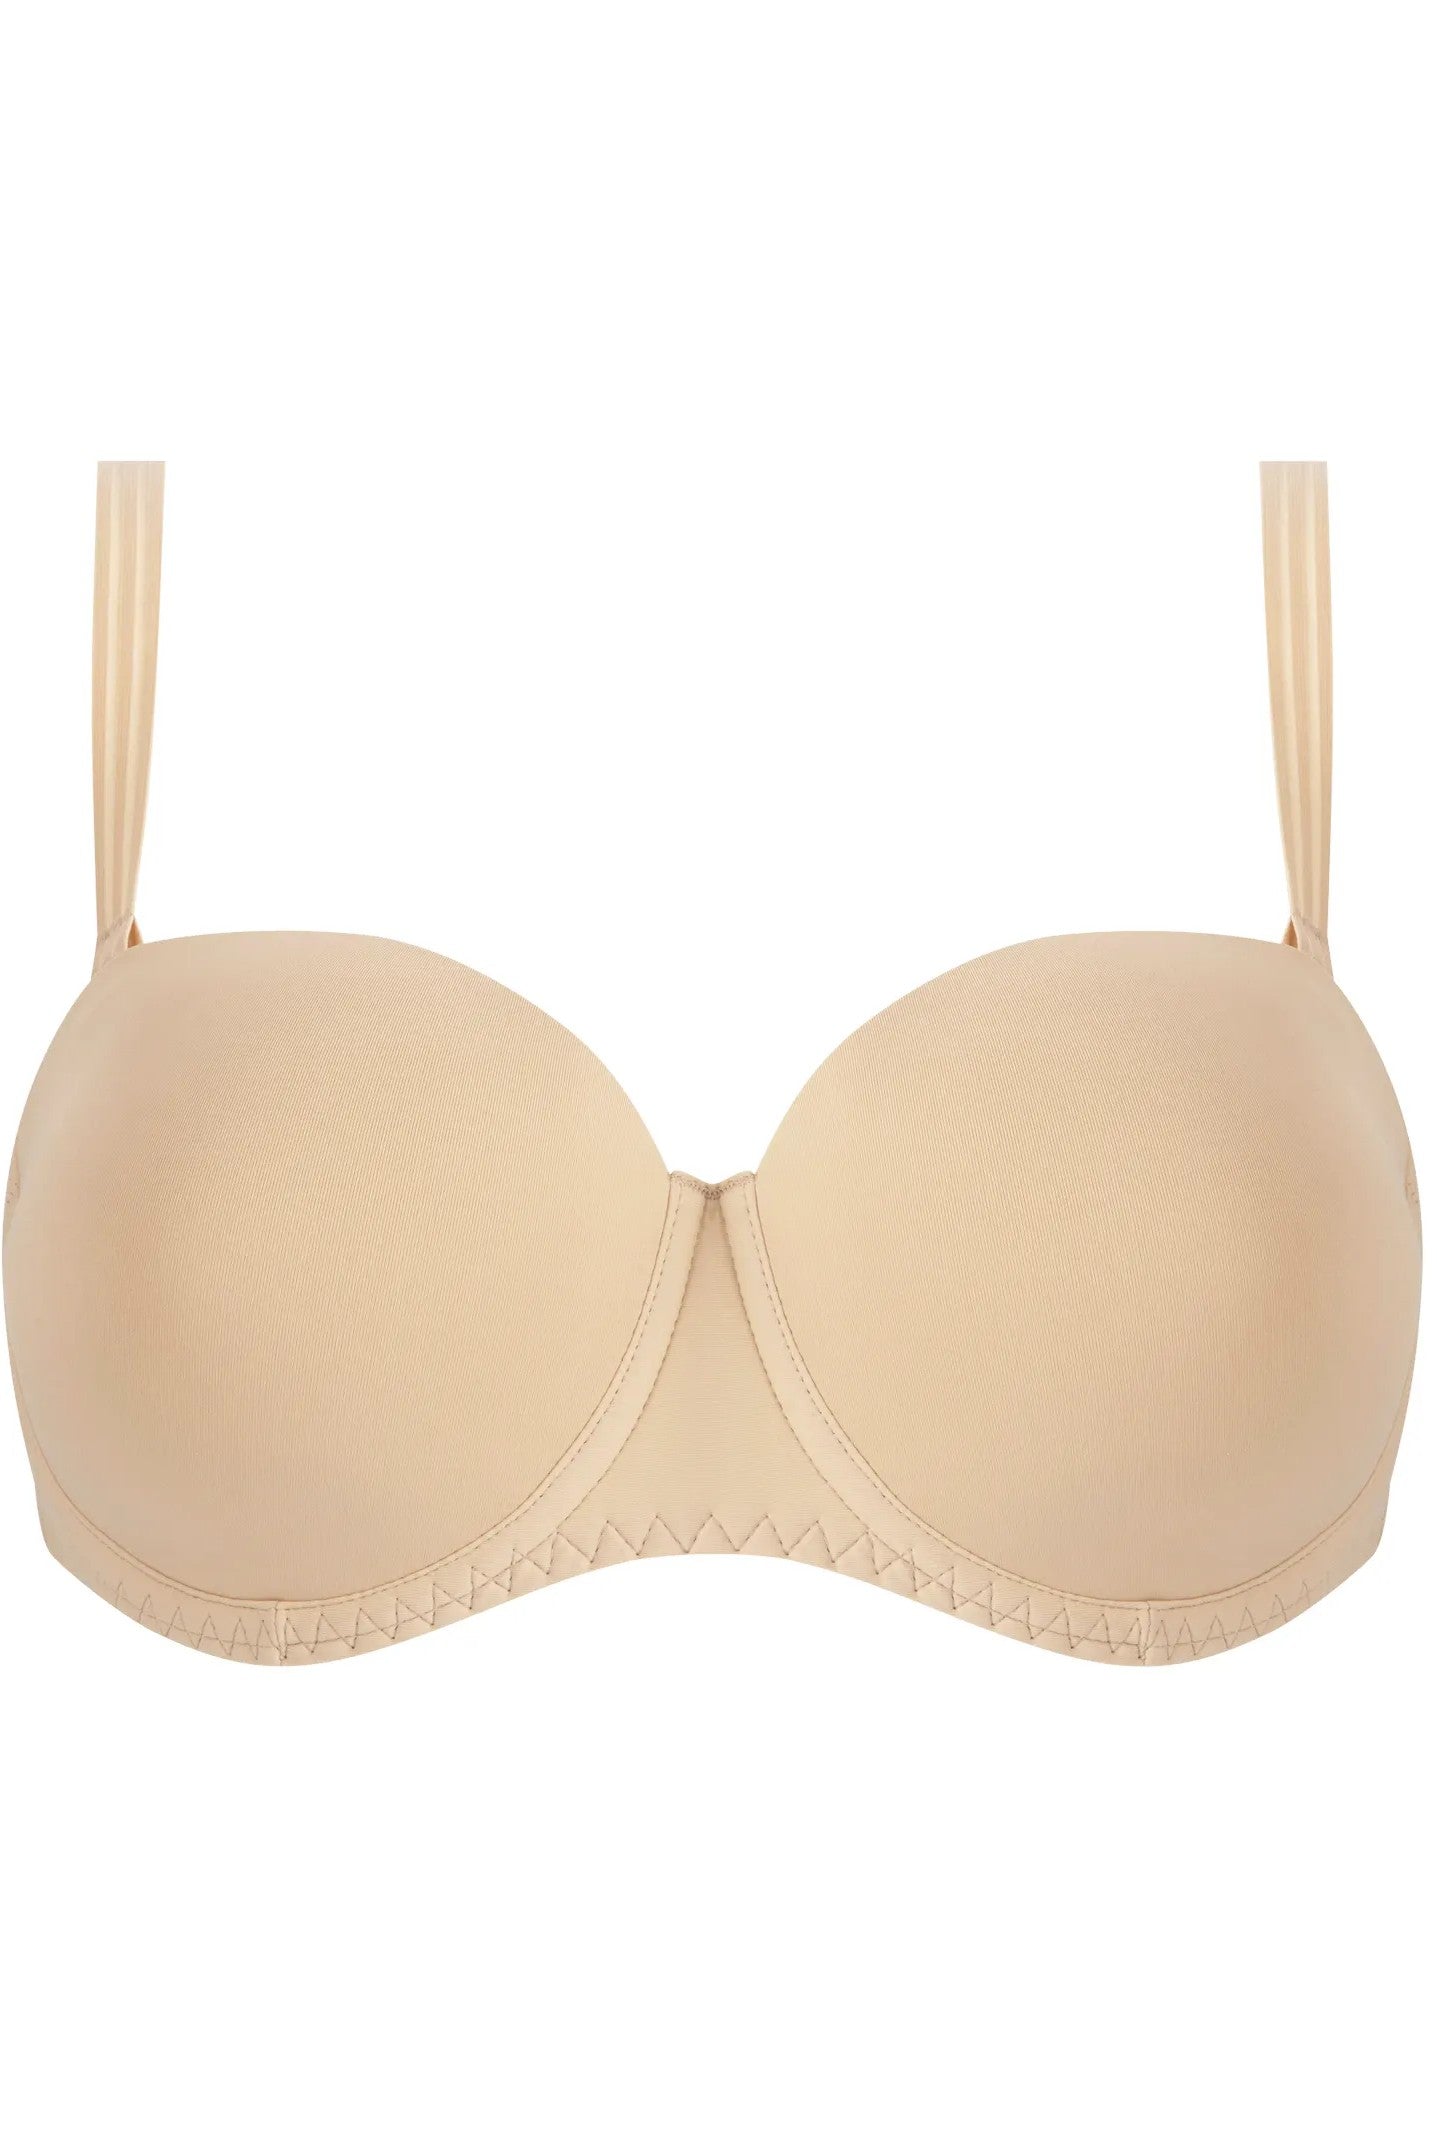 First bra everr, not sure if it fits, possible quad boob, small tubular  breast 30D - Cleo » Marcie Balconnet Bra (6831)